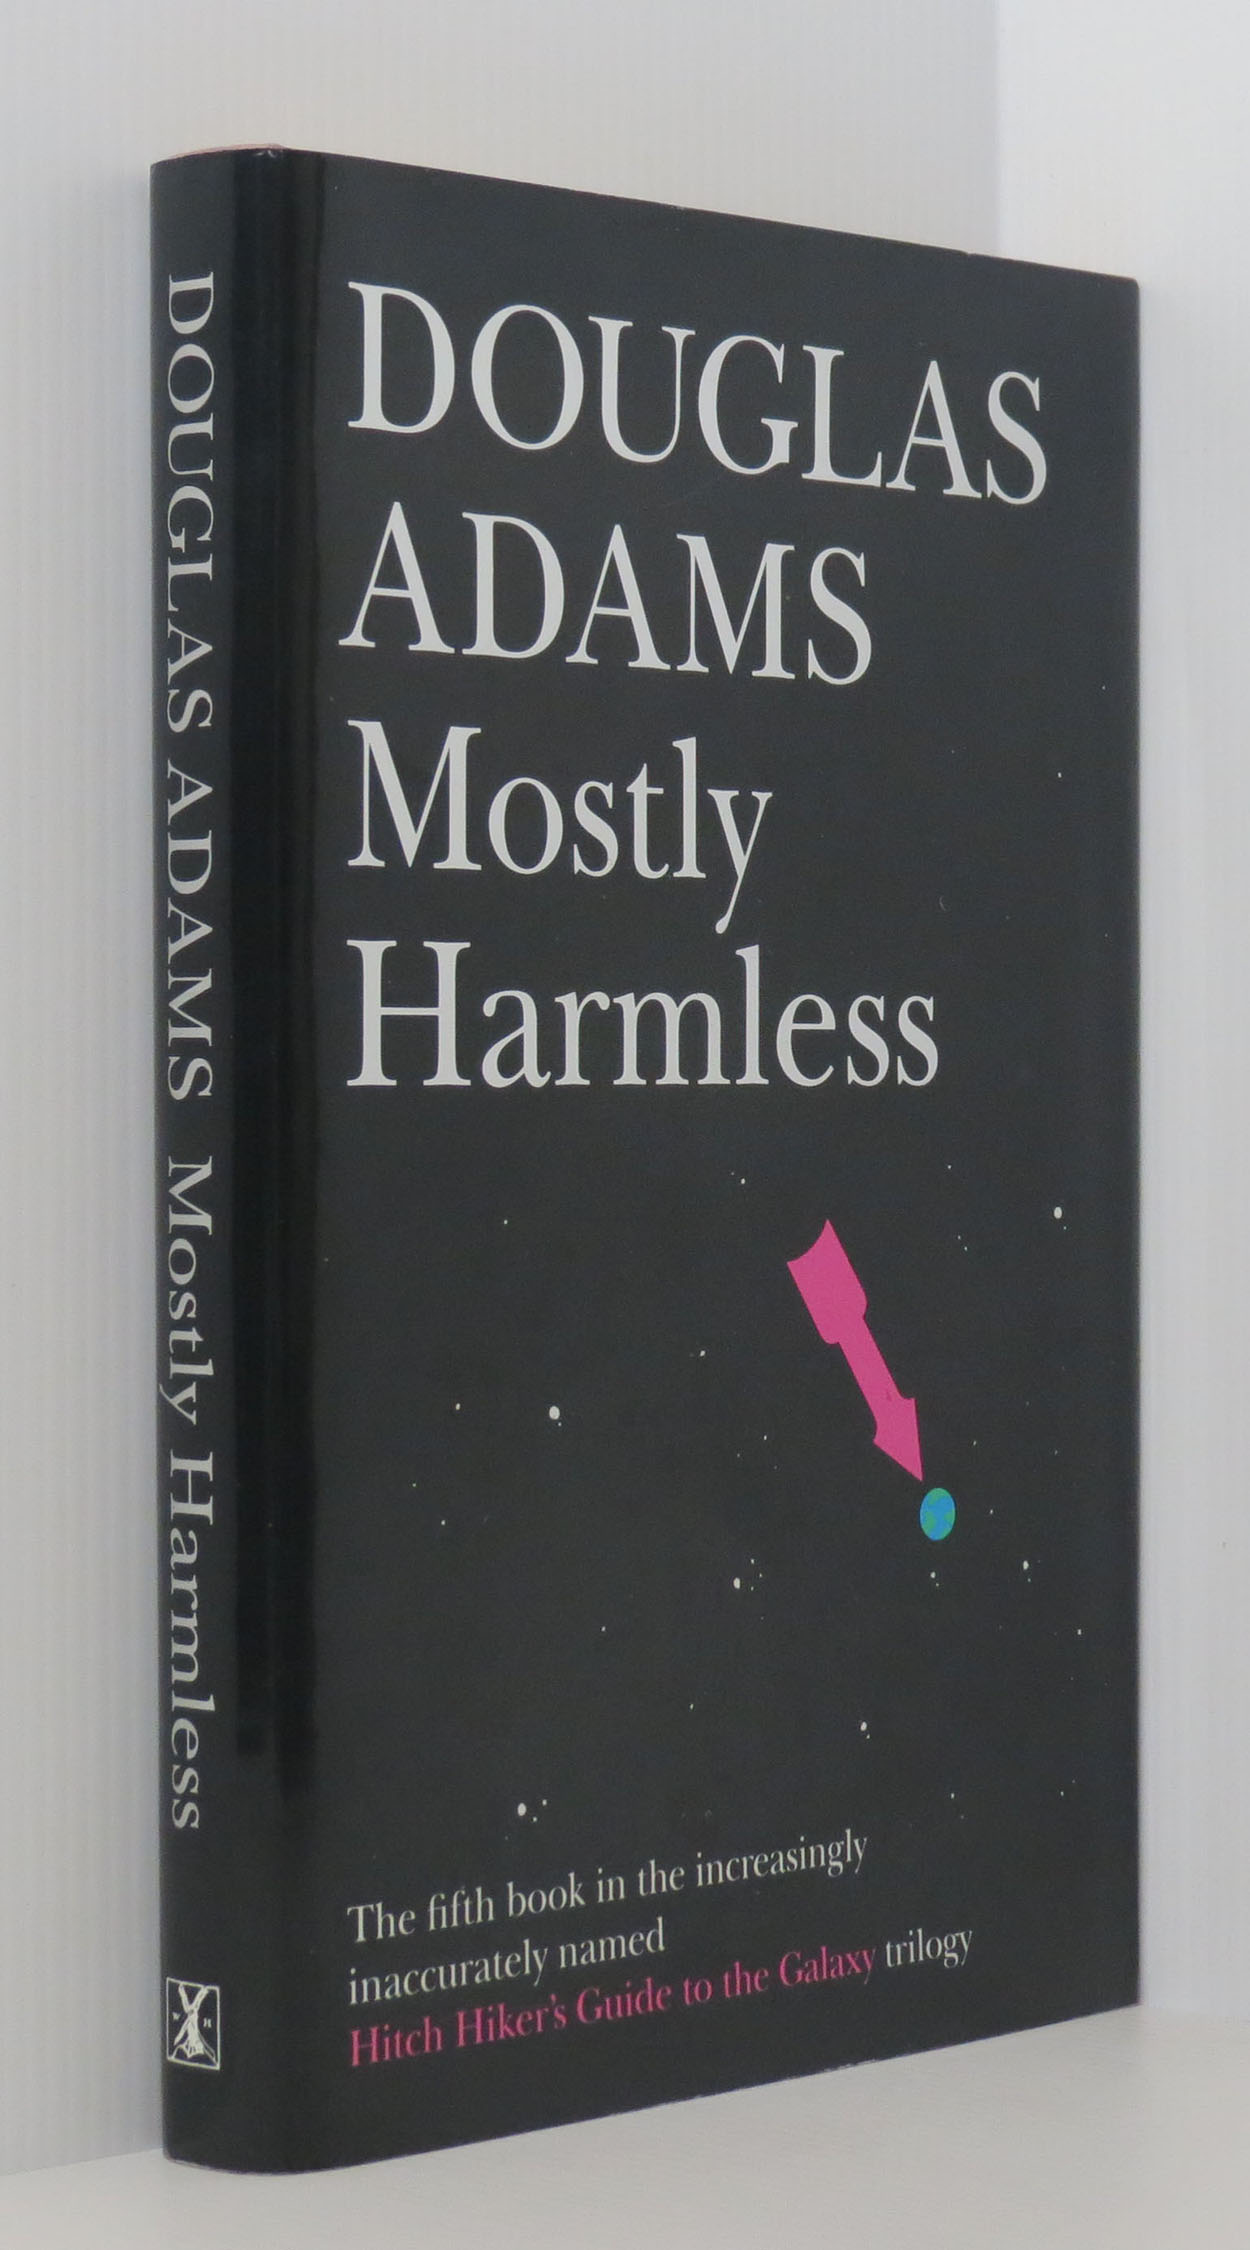 Image for Mostly Harmless. The Fifth Book in the Increasingly Inaccurately Named Hitch Hiker's Guide to the Galaxy Trilogy.